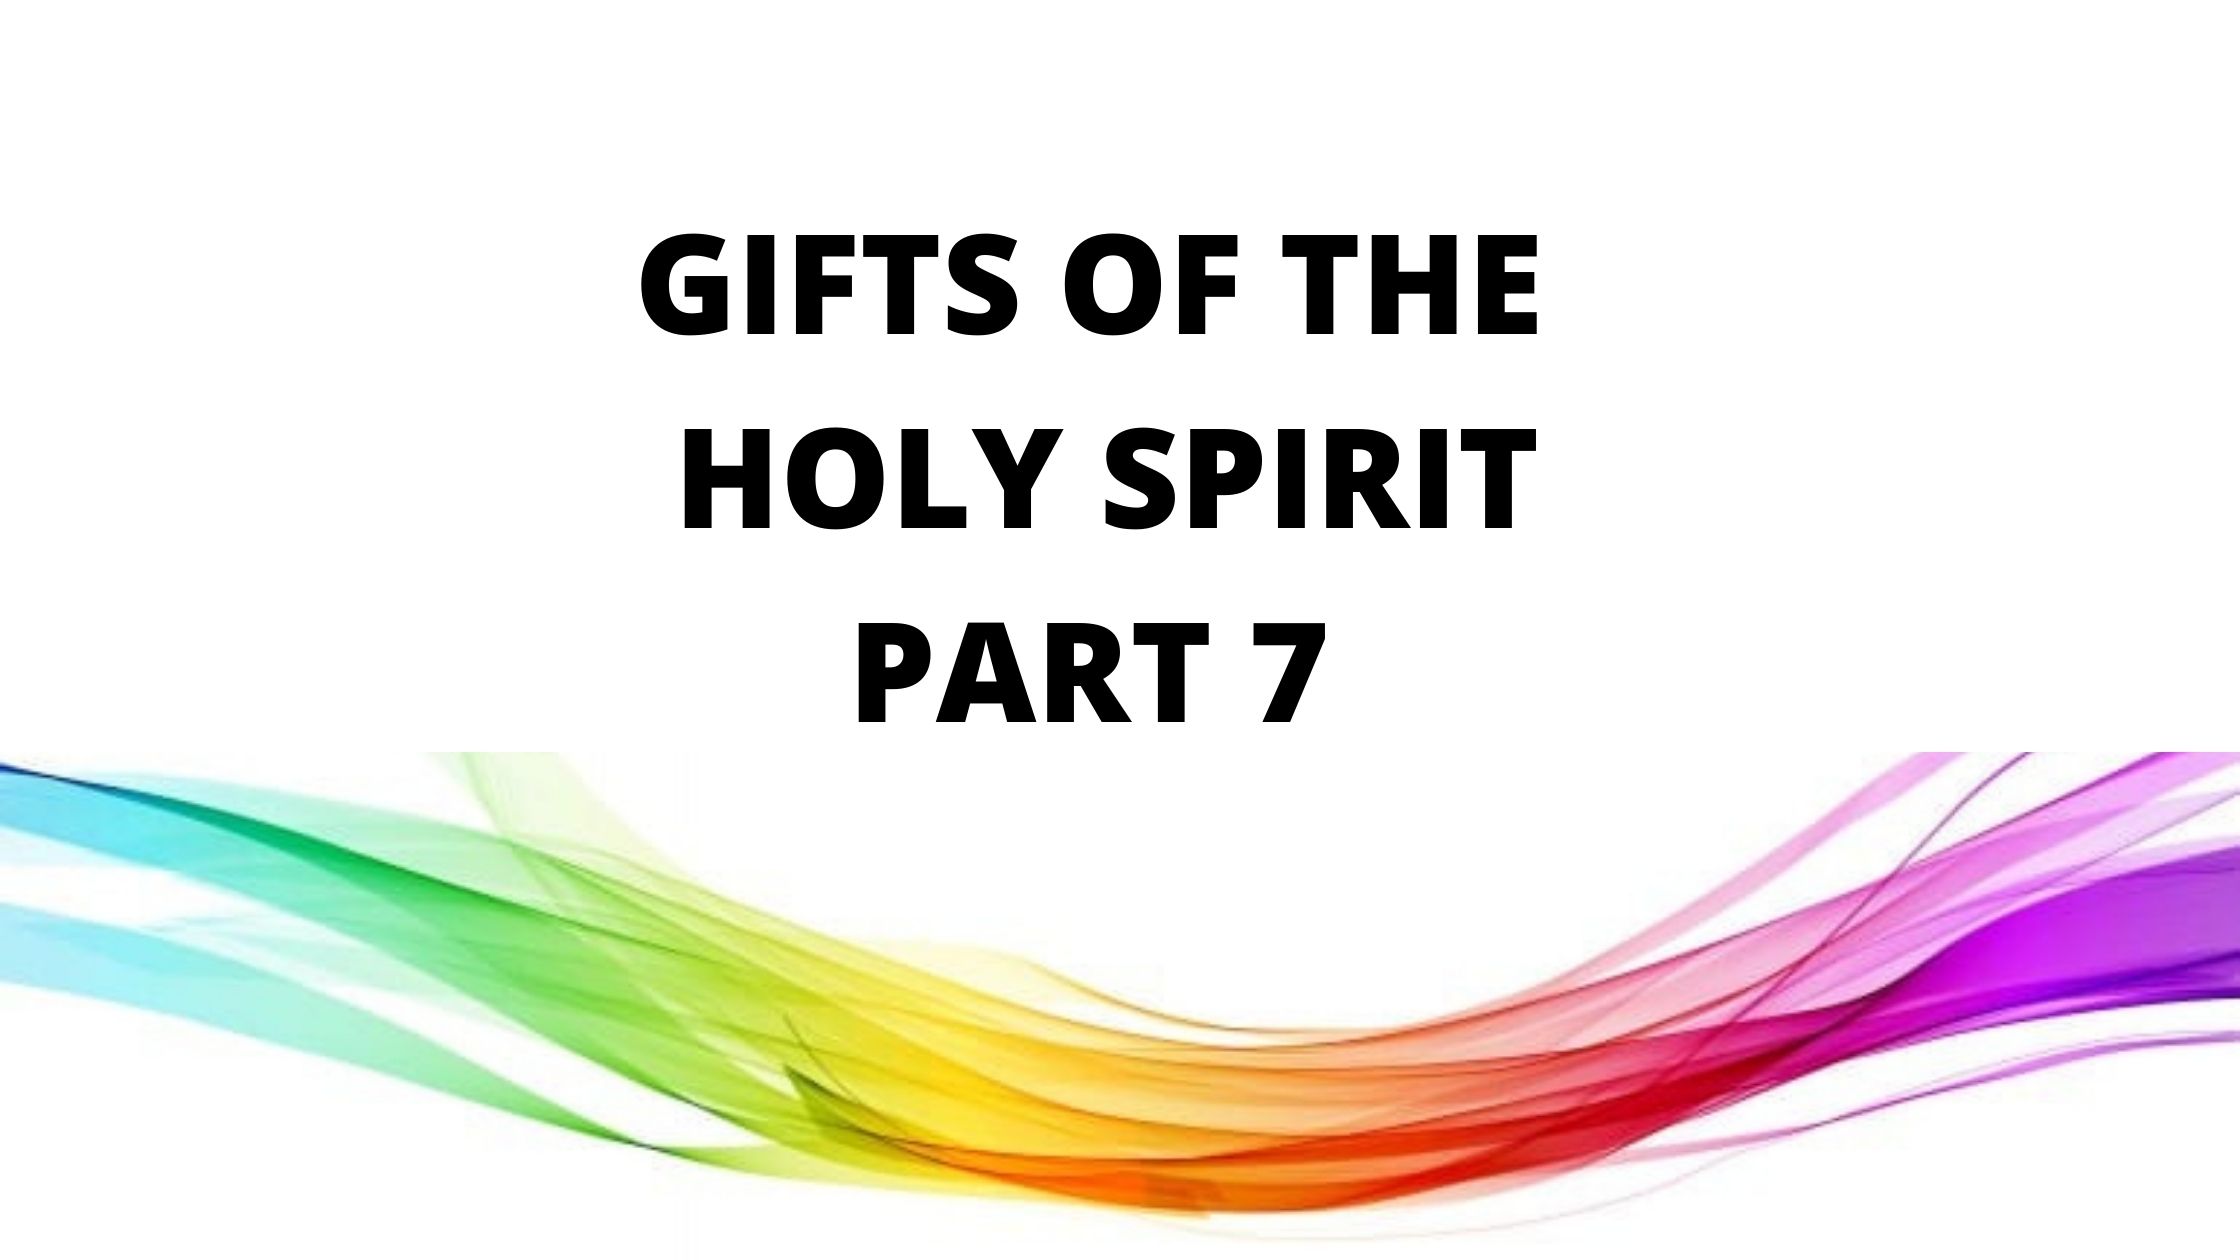 gifts-of-the-holy-spirit-part-7-word-of-grace-church-pune